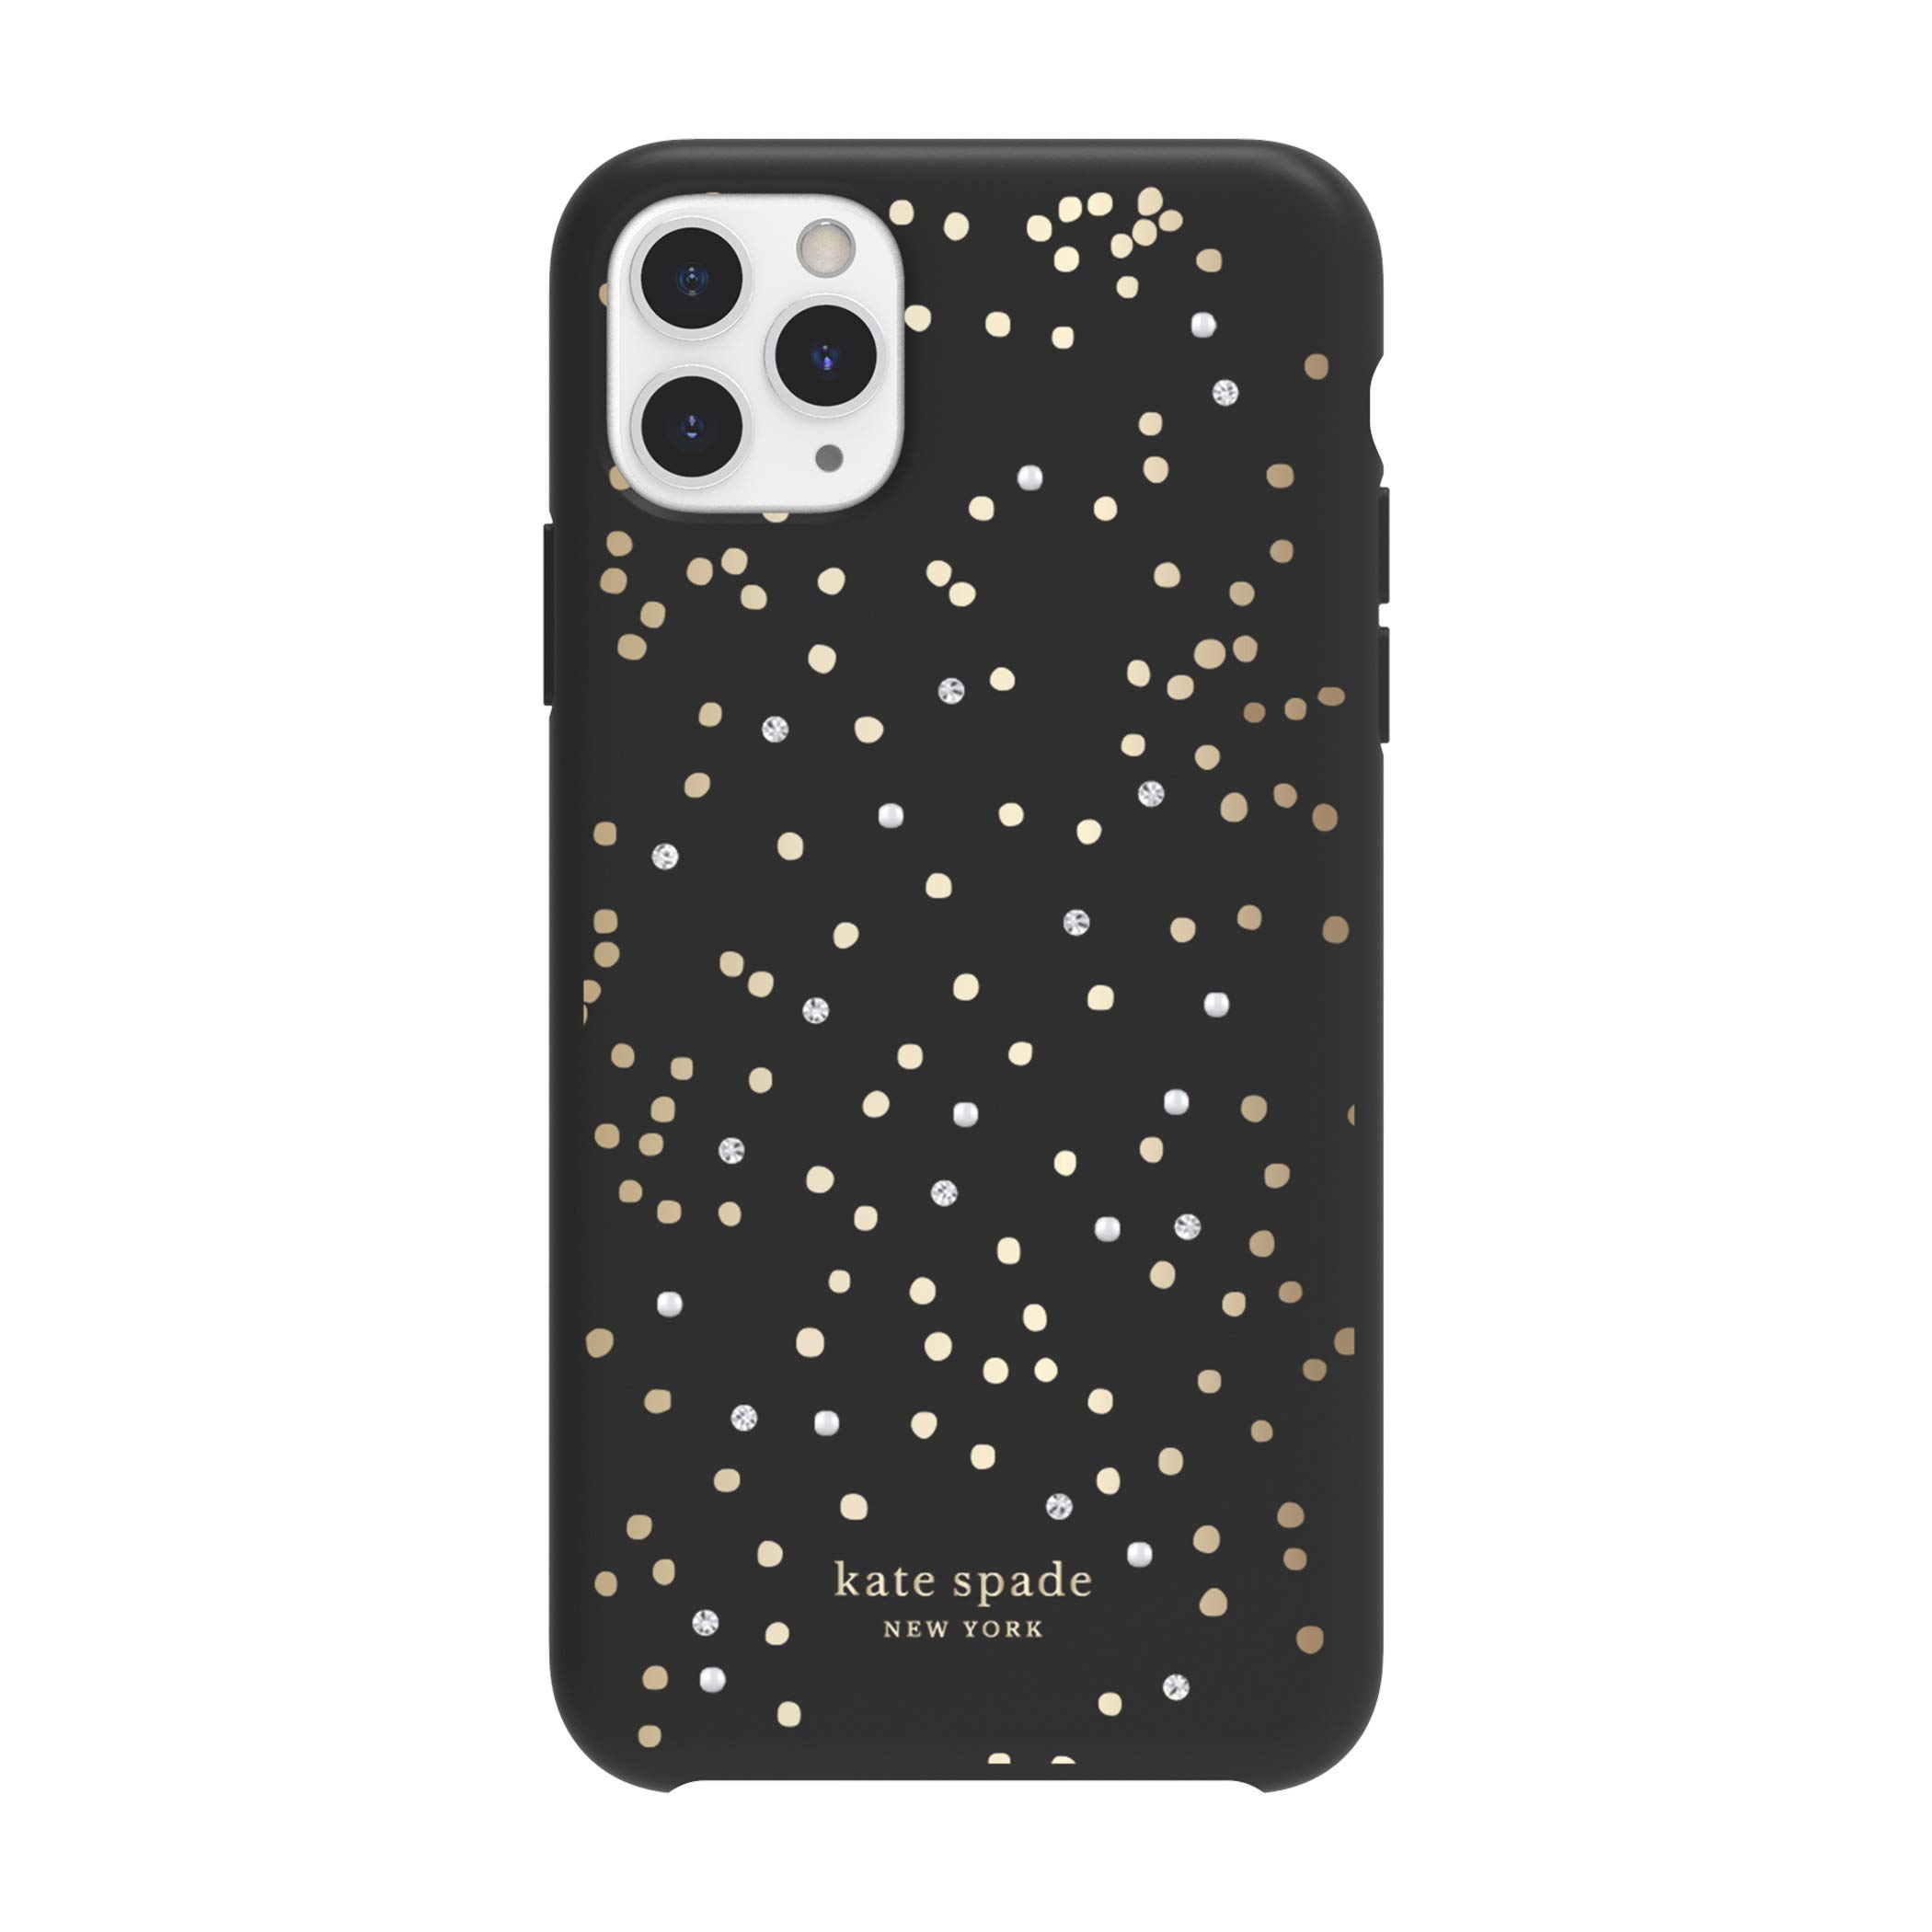 kate spade new york Disco Dots Case for iPhone 11 Pro Max,Thermoplastic Polyurethane - Soft Touch Protective Hardshell